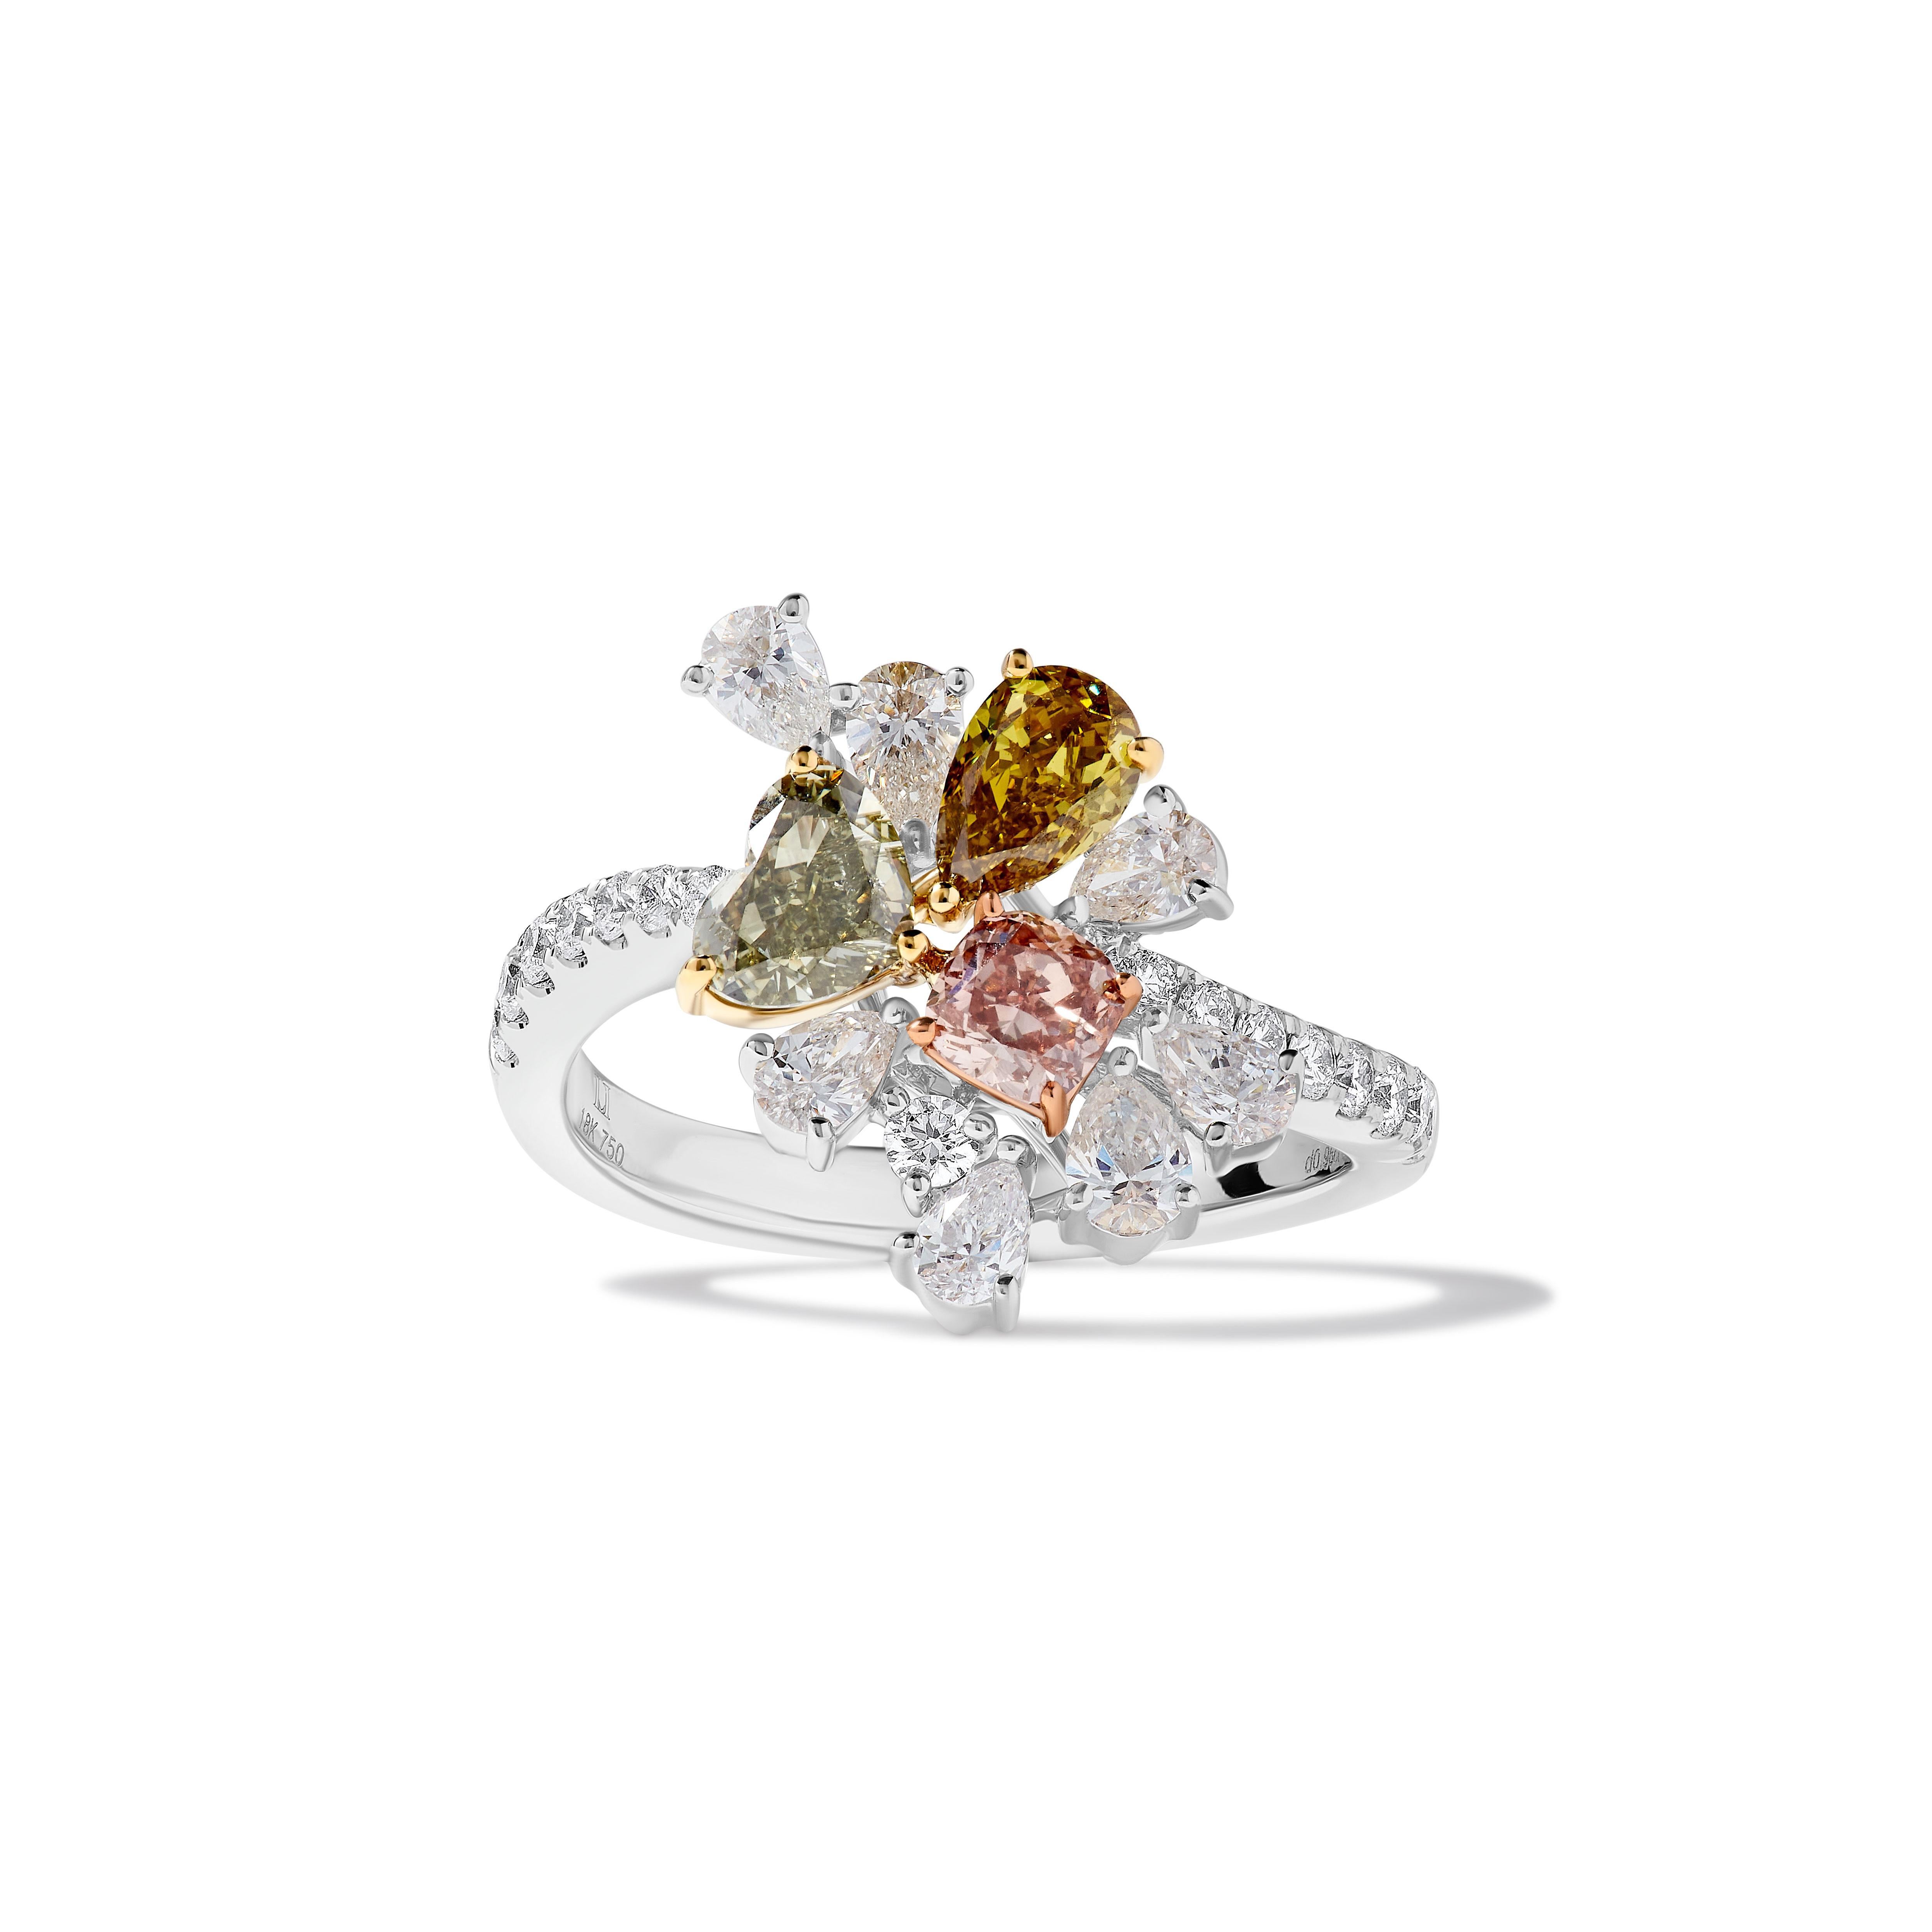 RareGemWorld's intriguing GIA certified diamond ring. Mounted in a beautiful 18K Rose and White Gold setting with a natural cushion cut pink diamond, a natural heart cut green diamond, and a natural pear cut yellow diamond. These diamonds are